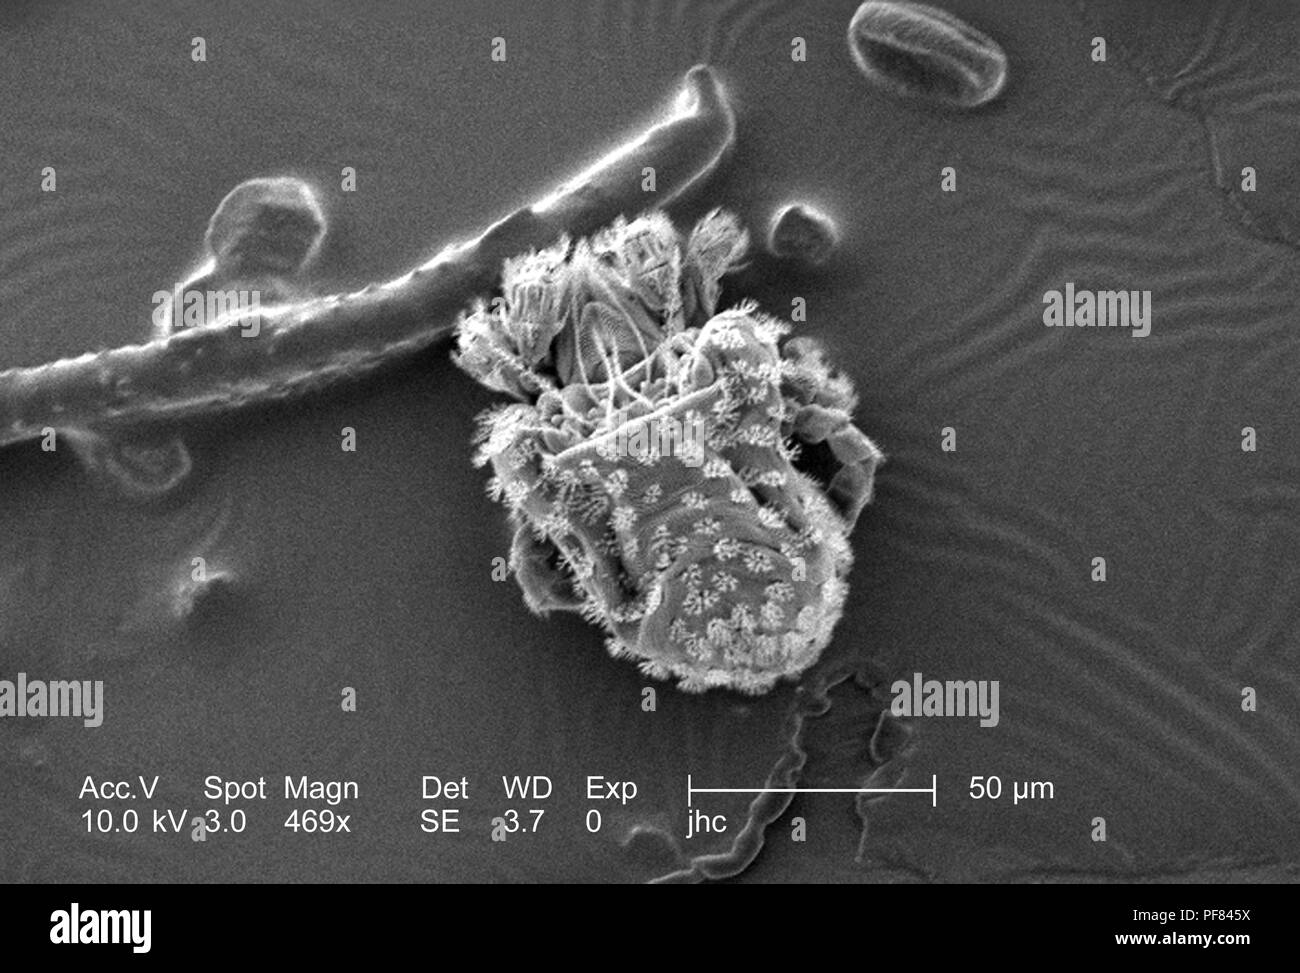 Presence of numbers fungivorous soil and leaf-litter/moss mites from the Family Nanorchestidae found on the lizard skin, revealed in the 469x magnified scanning electron microscopic (SEM) image, 2006. Image courtesy Centers for Disease Control (CDC) / William L. Nicholson, Ph.D. Cal Welbourn, Ph.D. Gary R. Mullen. () Stock Photo